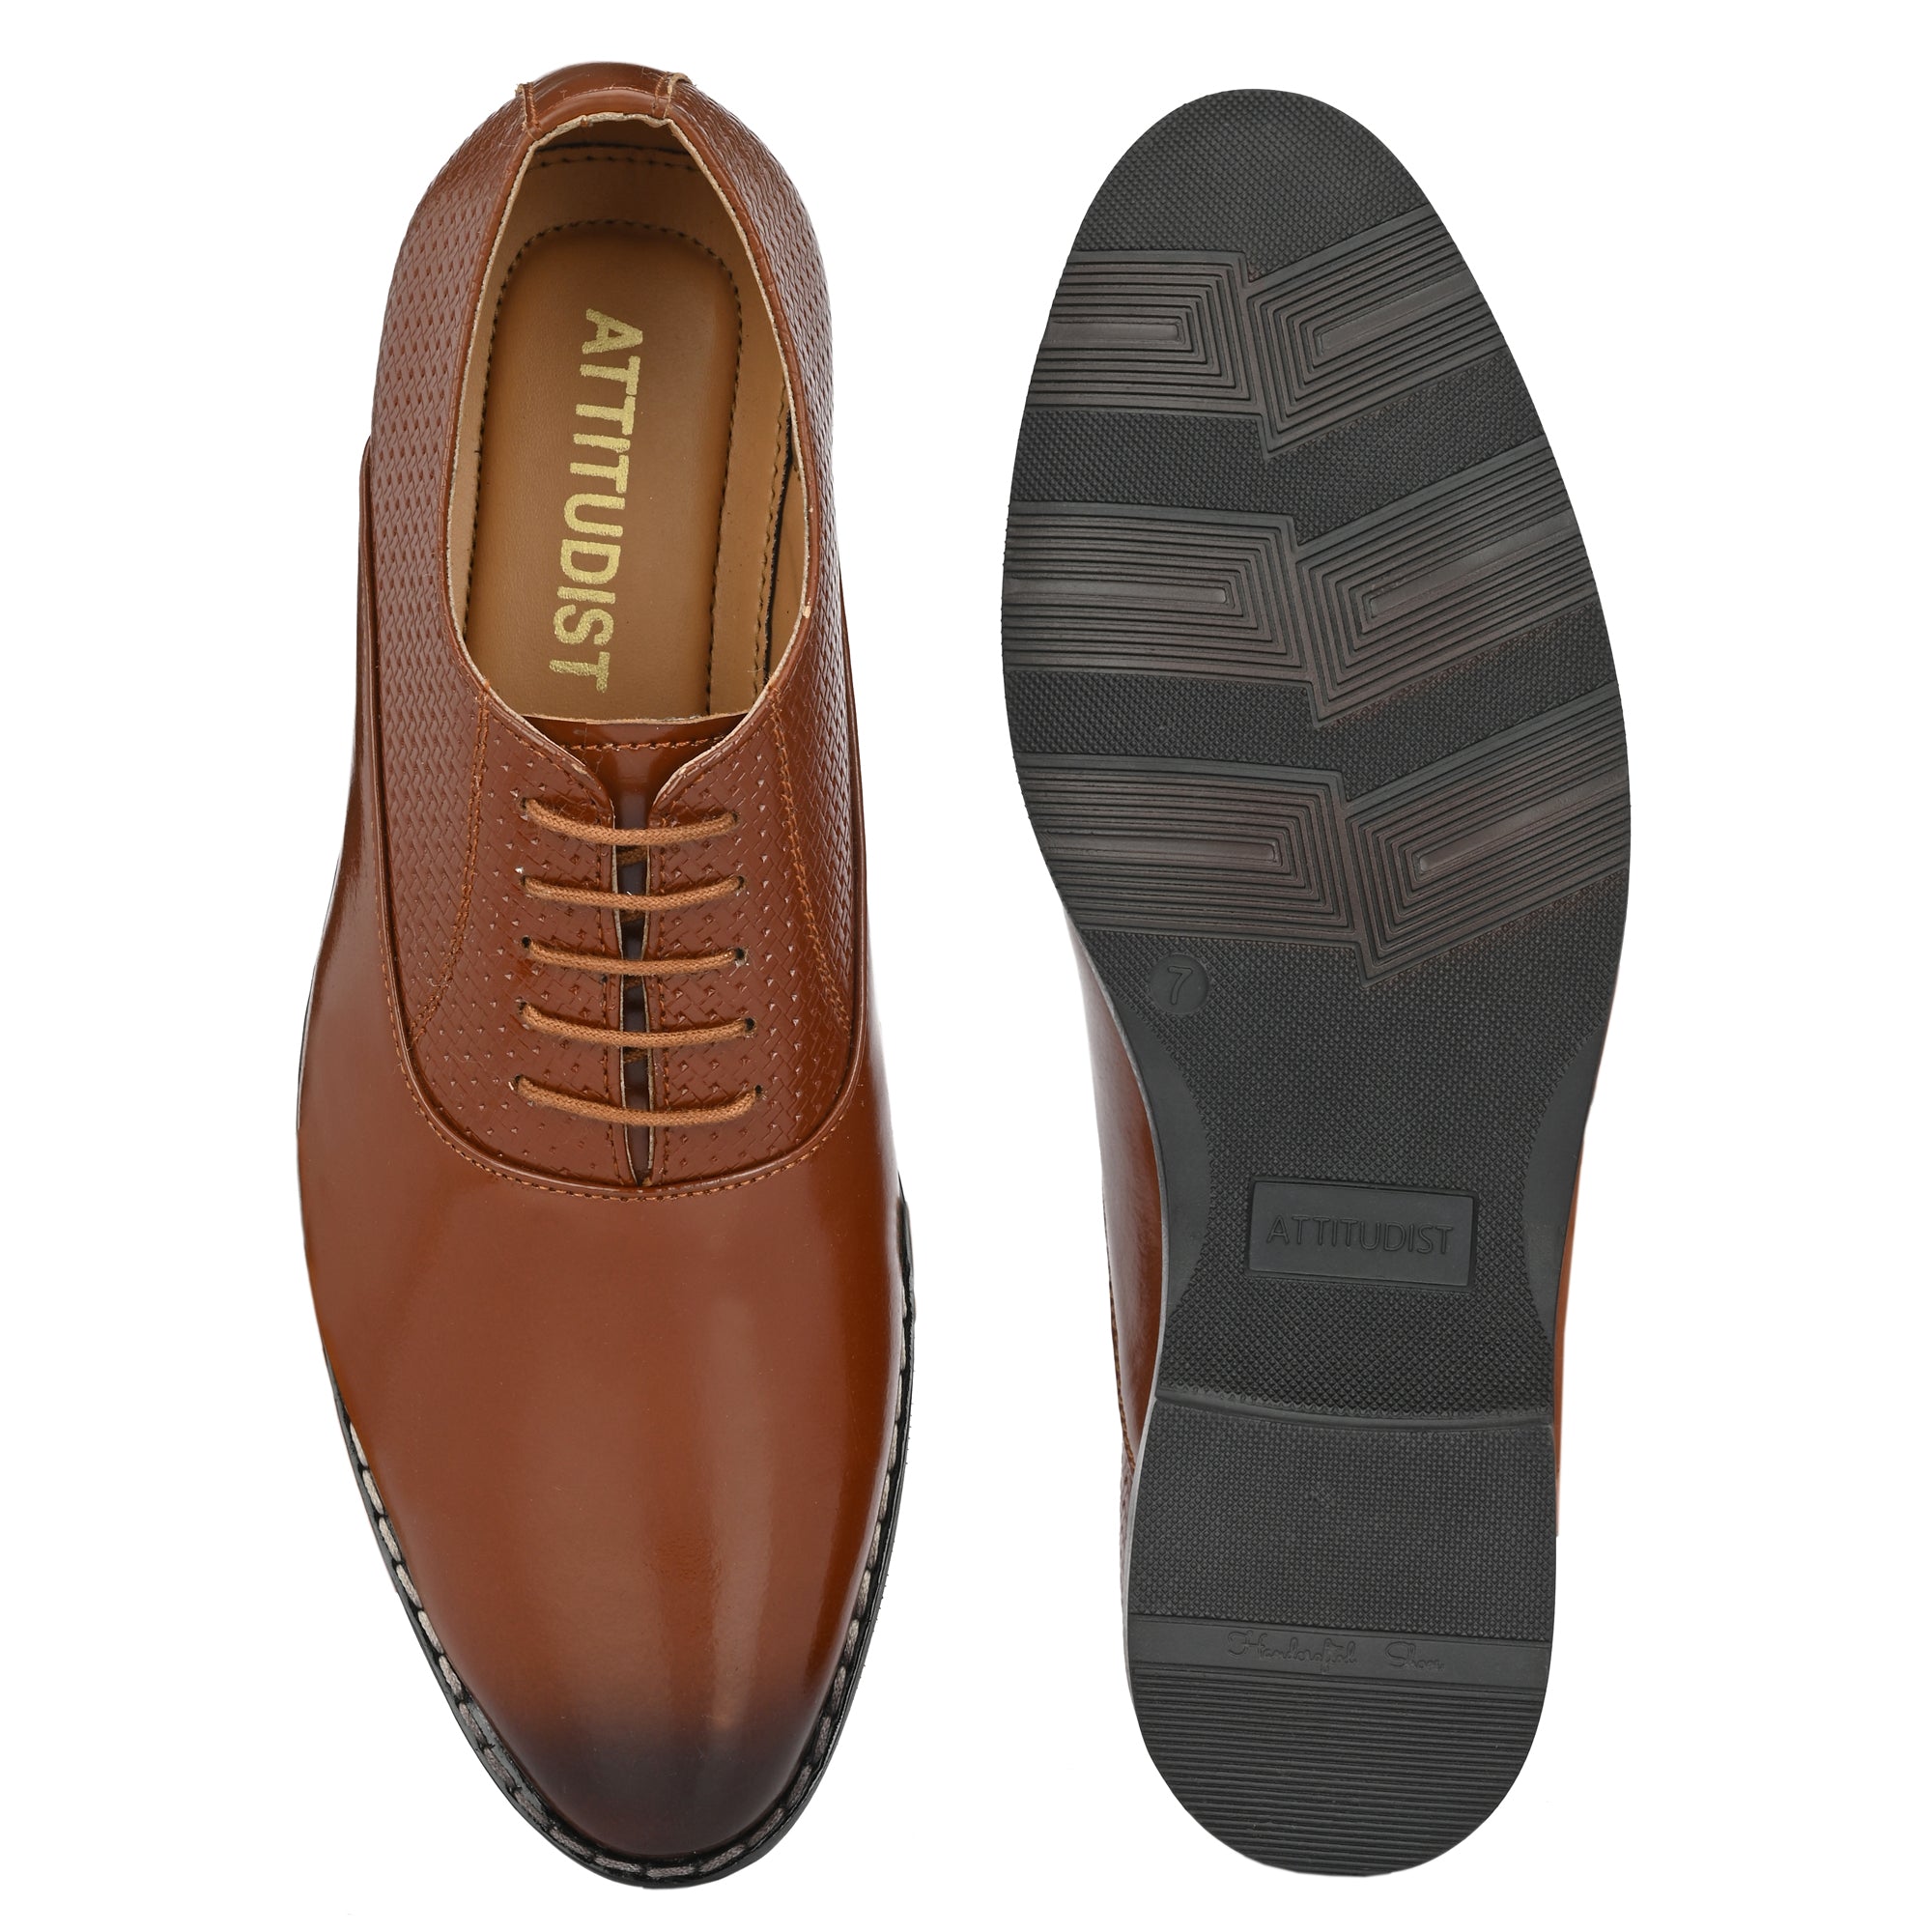 tan-formal-lace-up-attitudist-shoes-for-men-with-semi-chatai-design-sp6c